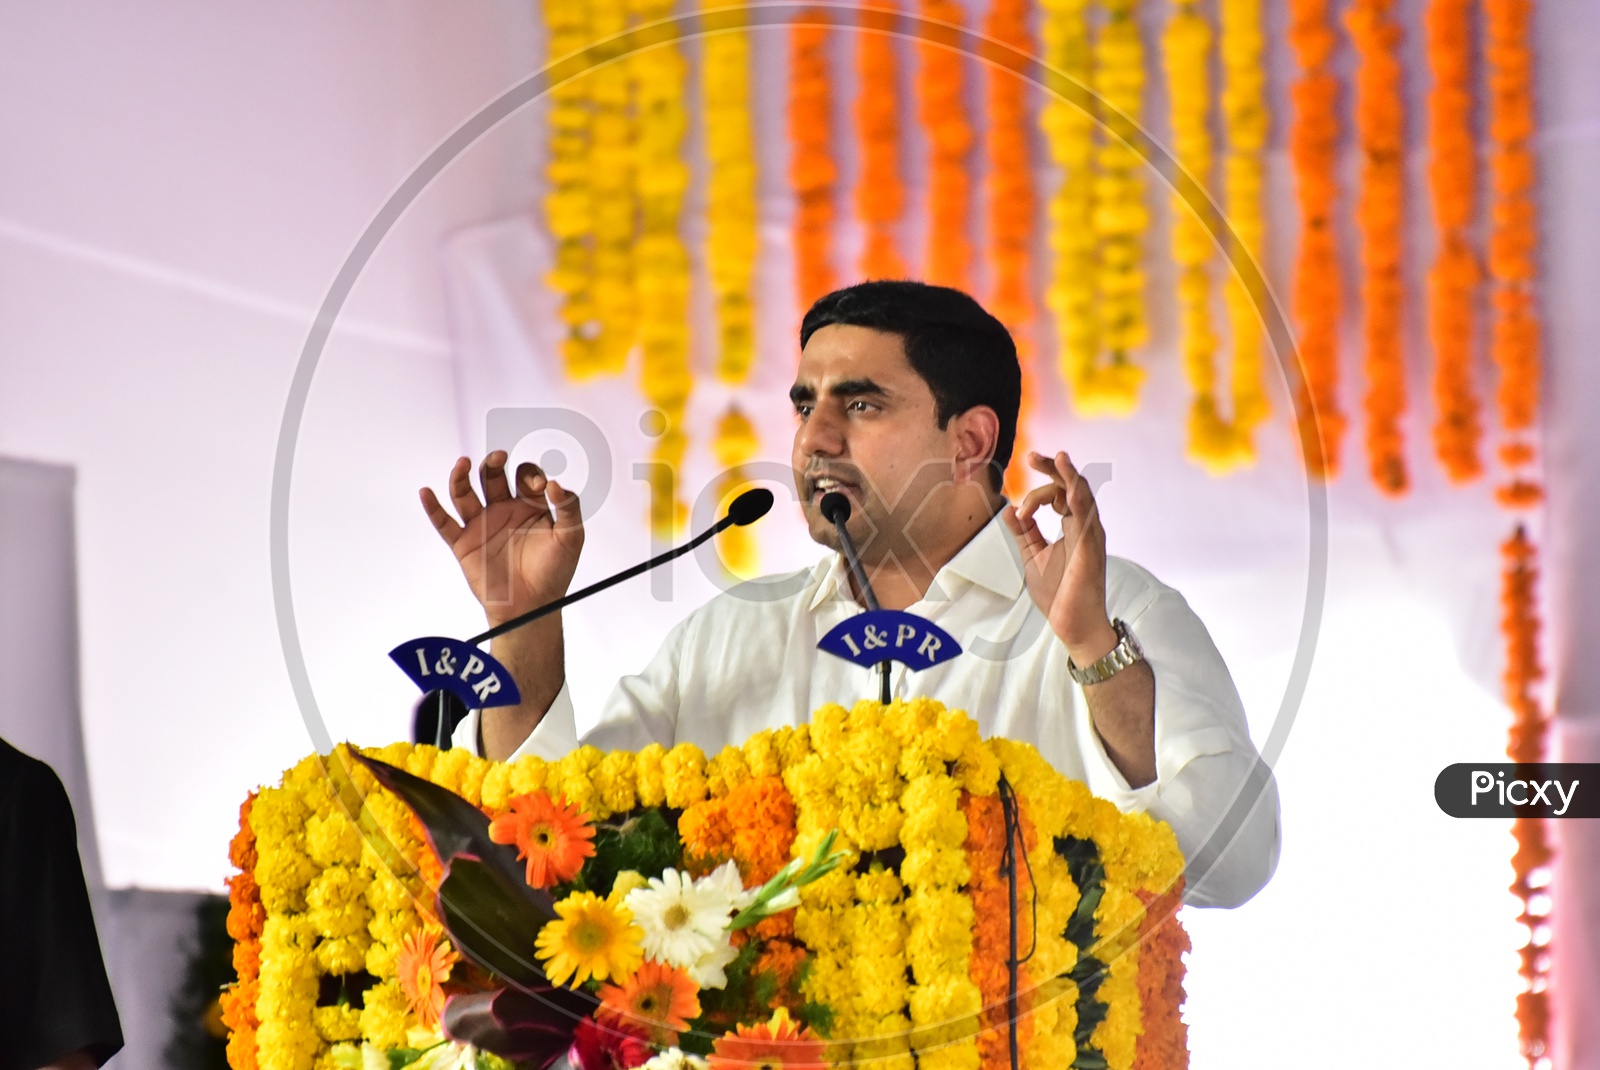 State Minister for Information Technology and Rural Development Nara Lokesh during the lauch of Swacch Andhra Mission